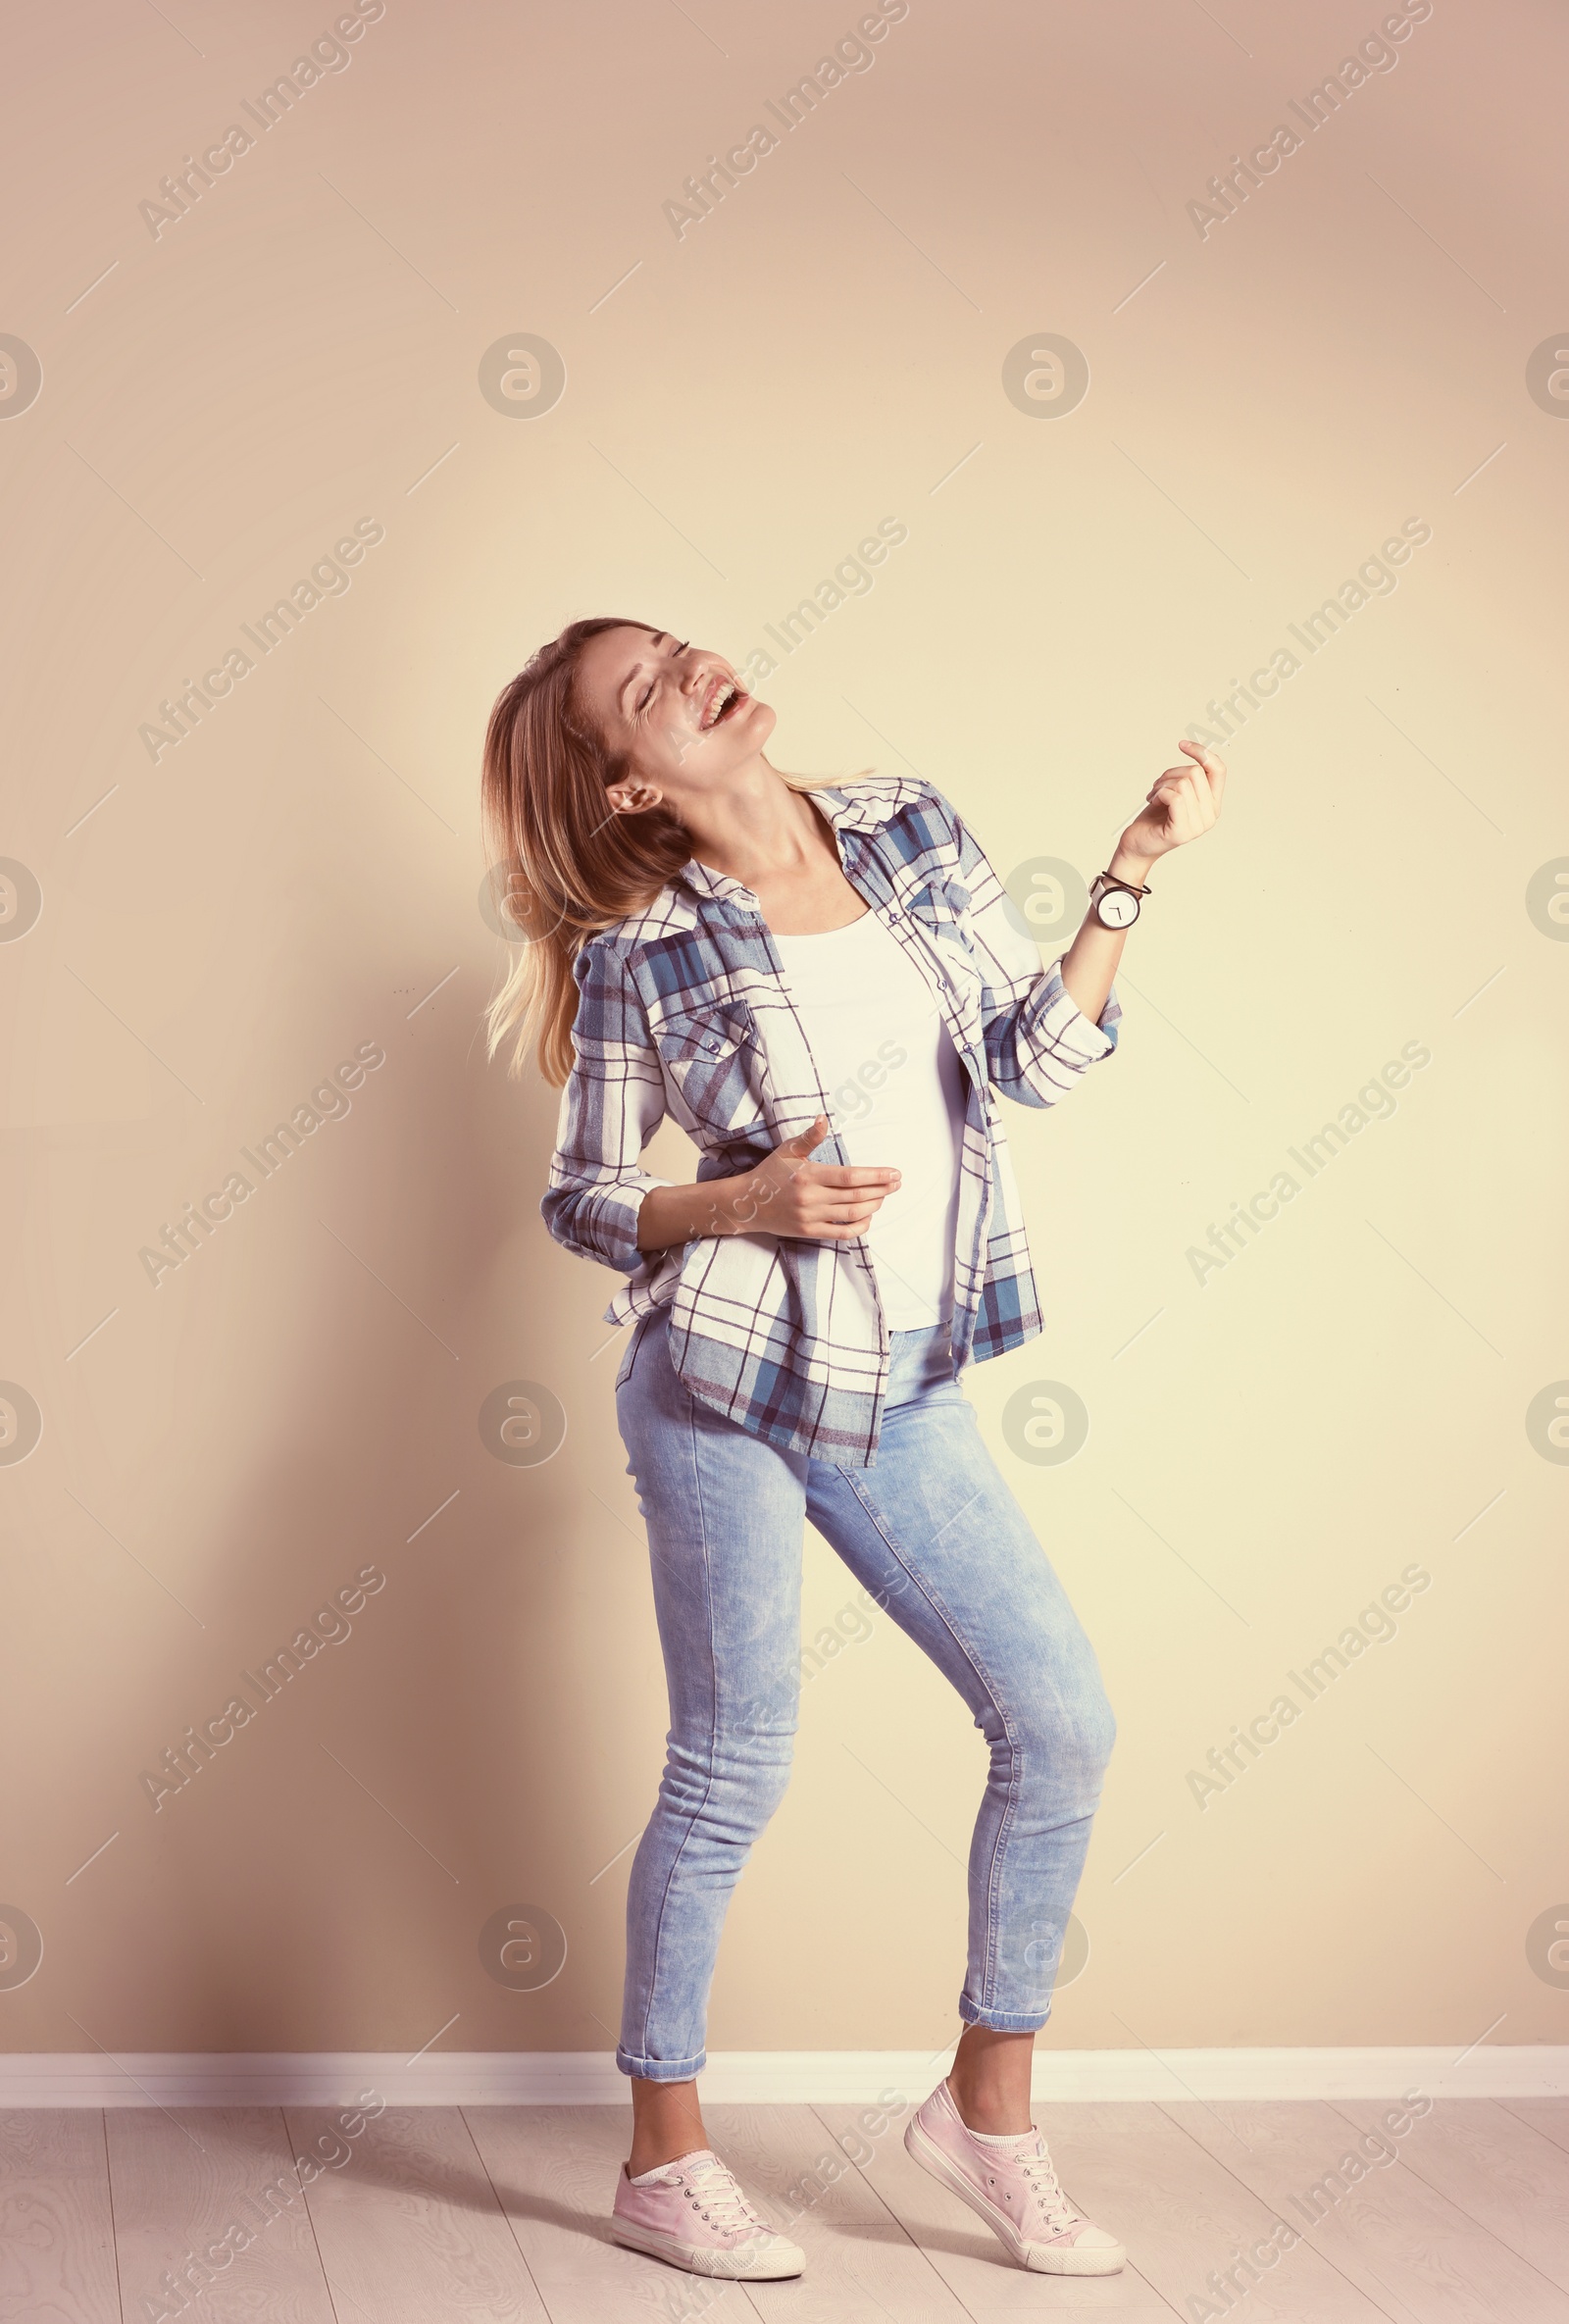 Photo of Young woman playing air guitar near grey wall